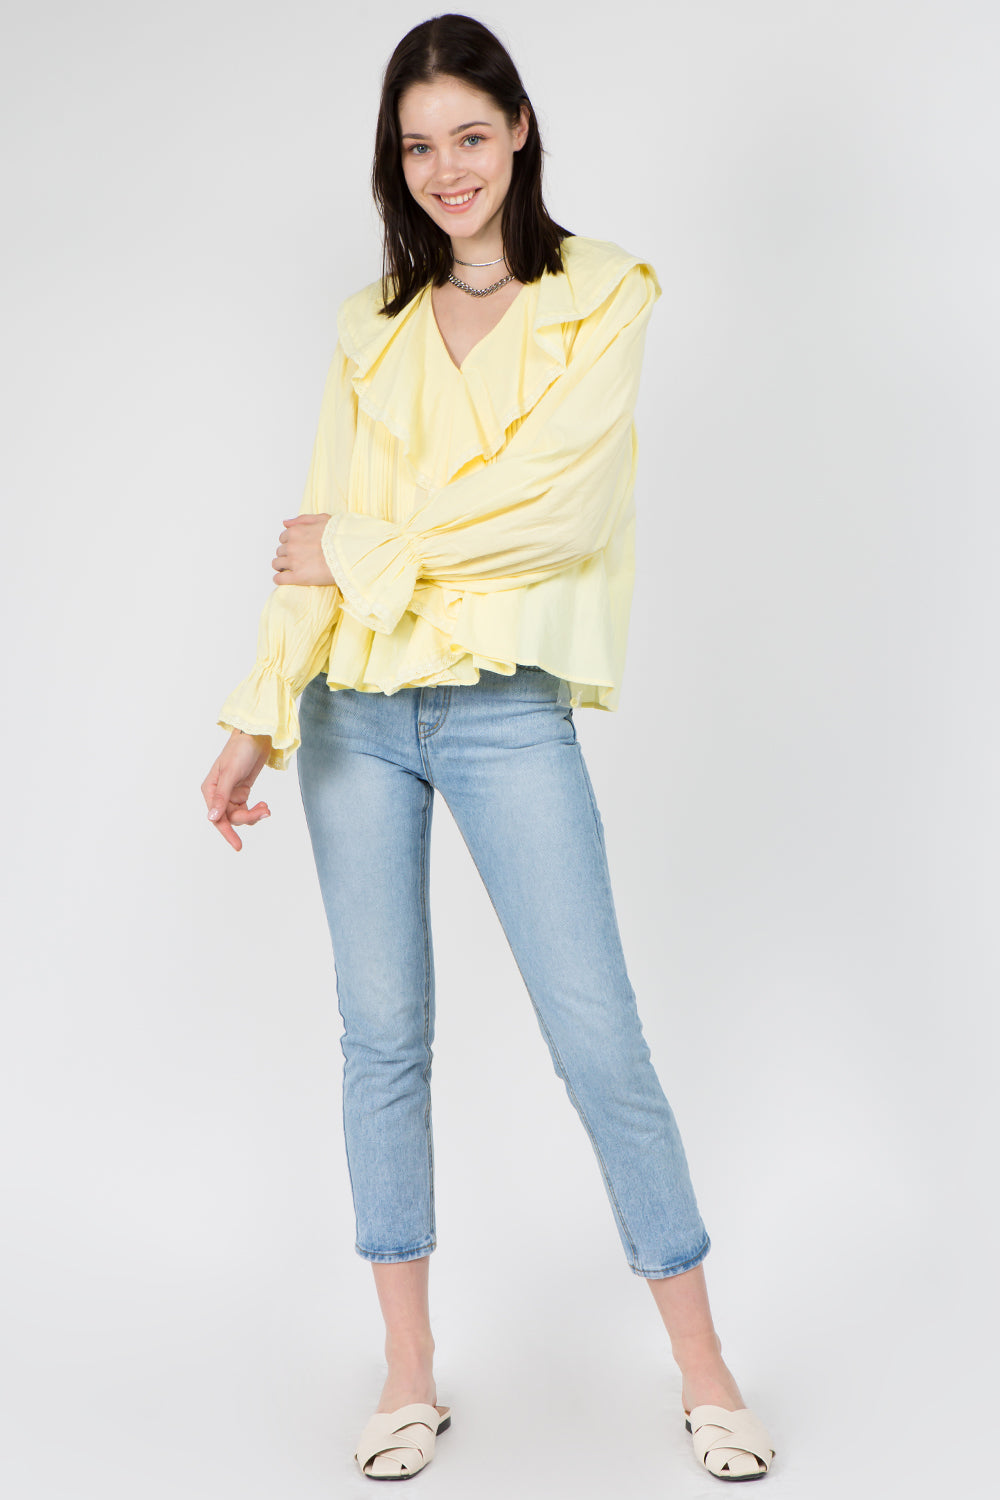 Lace Trimmed Ruffle Blouse - Whiteroom+Cactus